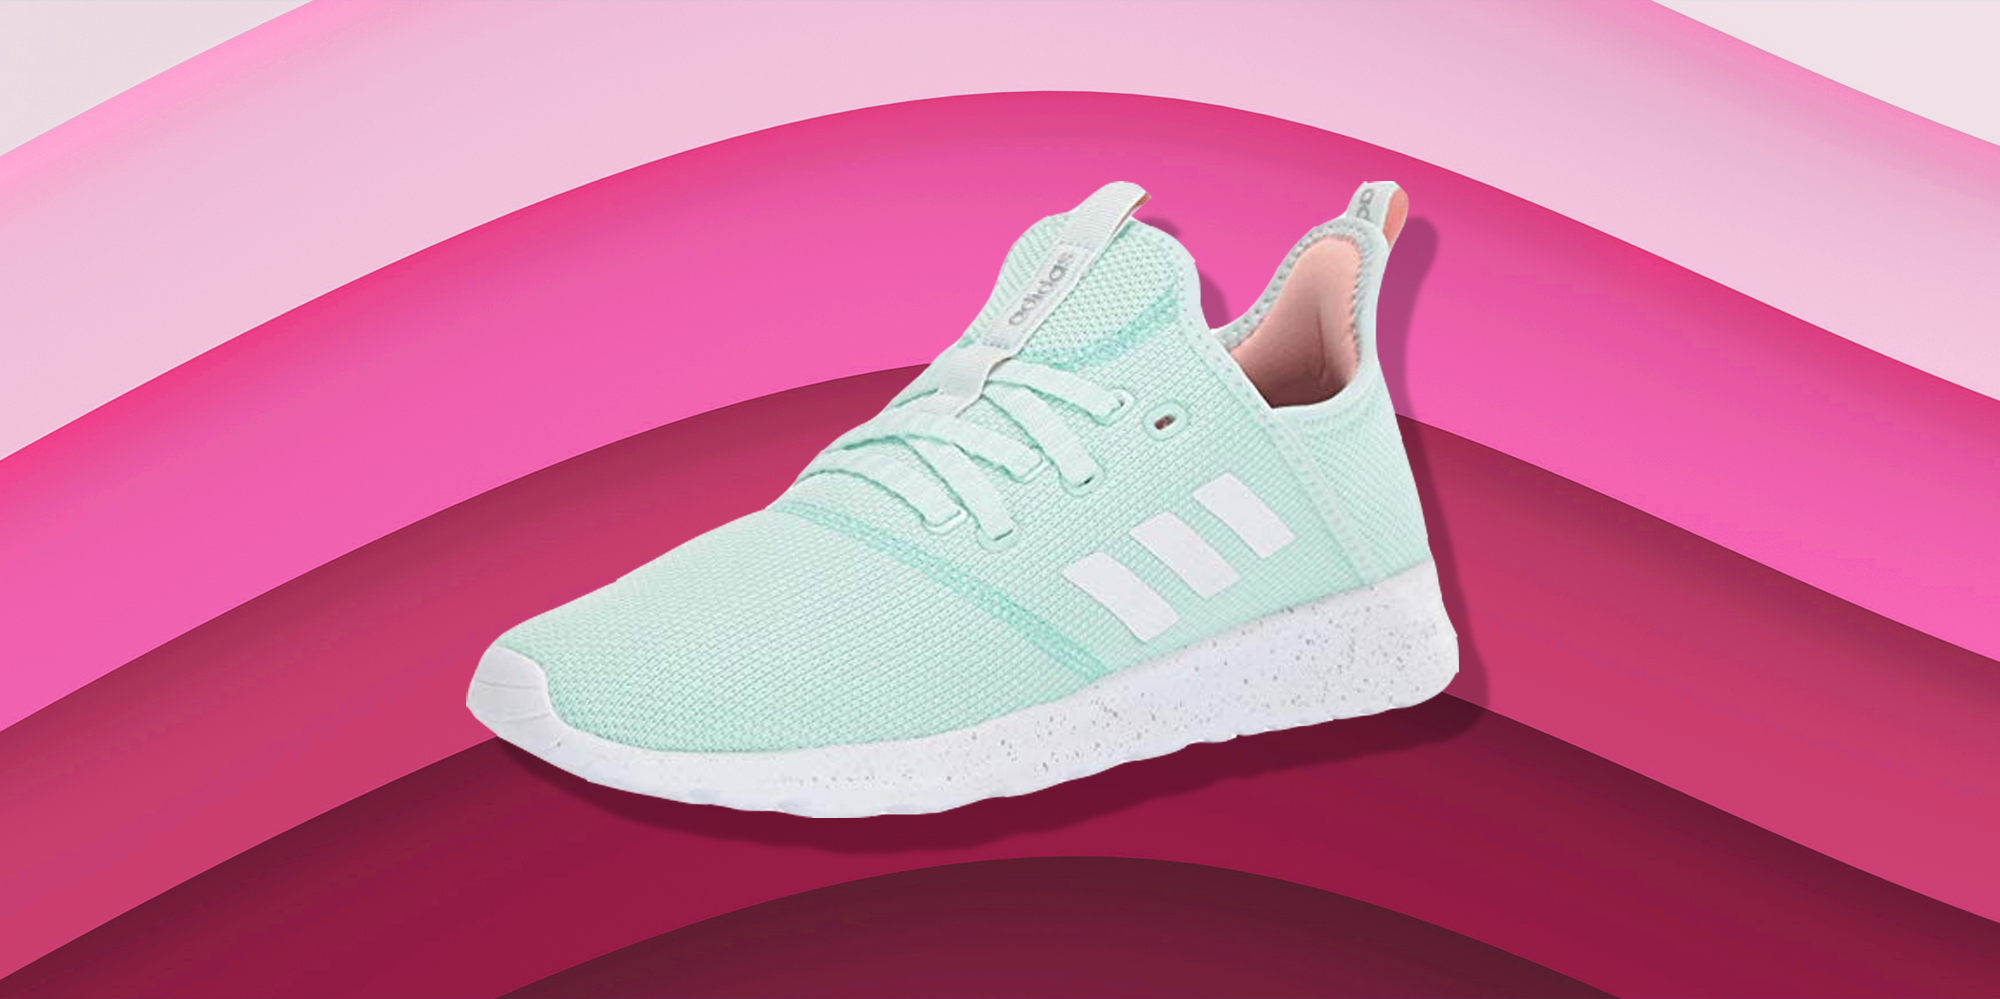 turquoise adidas sneakers